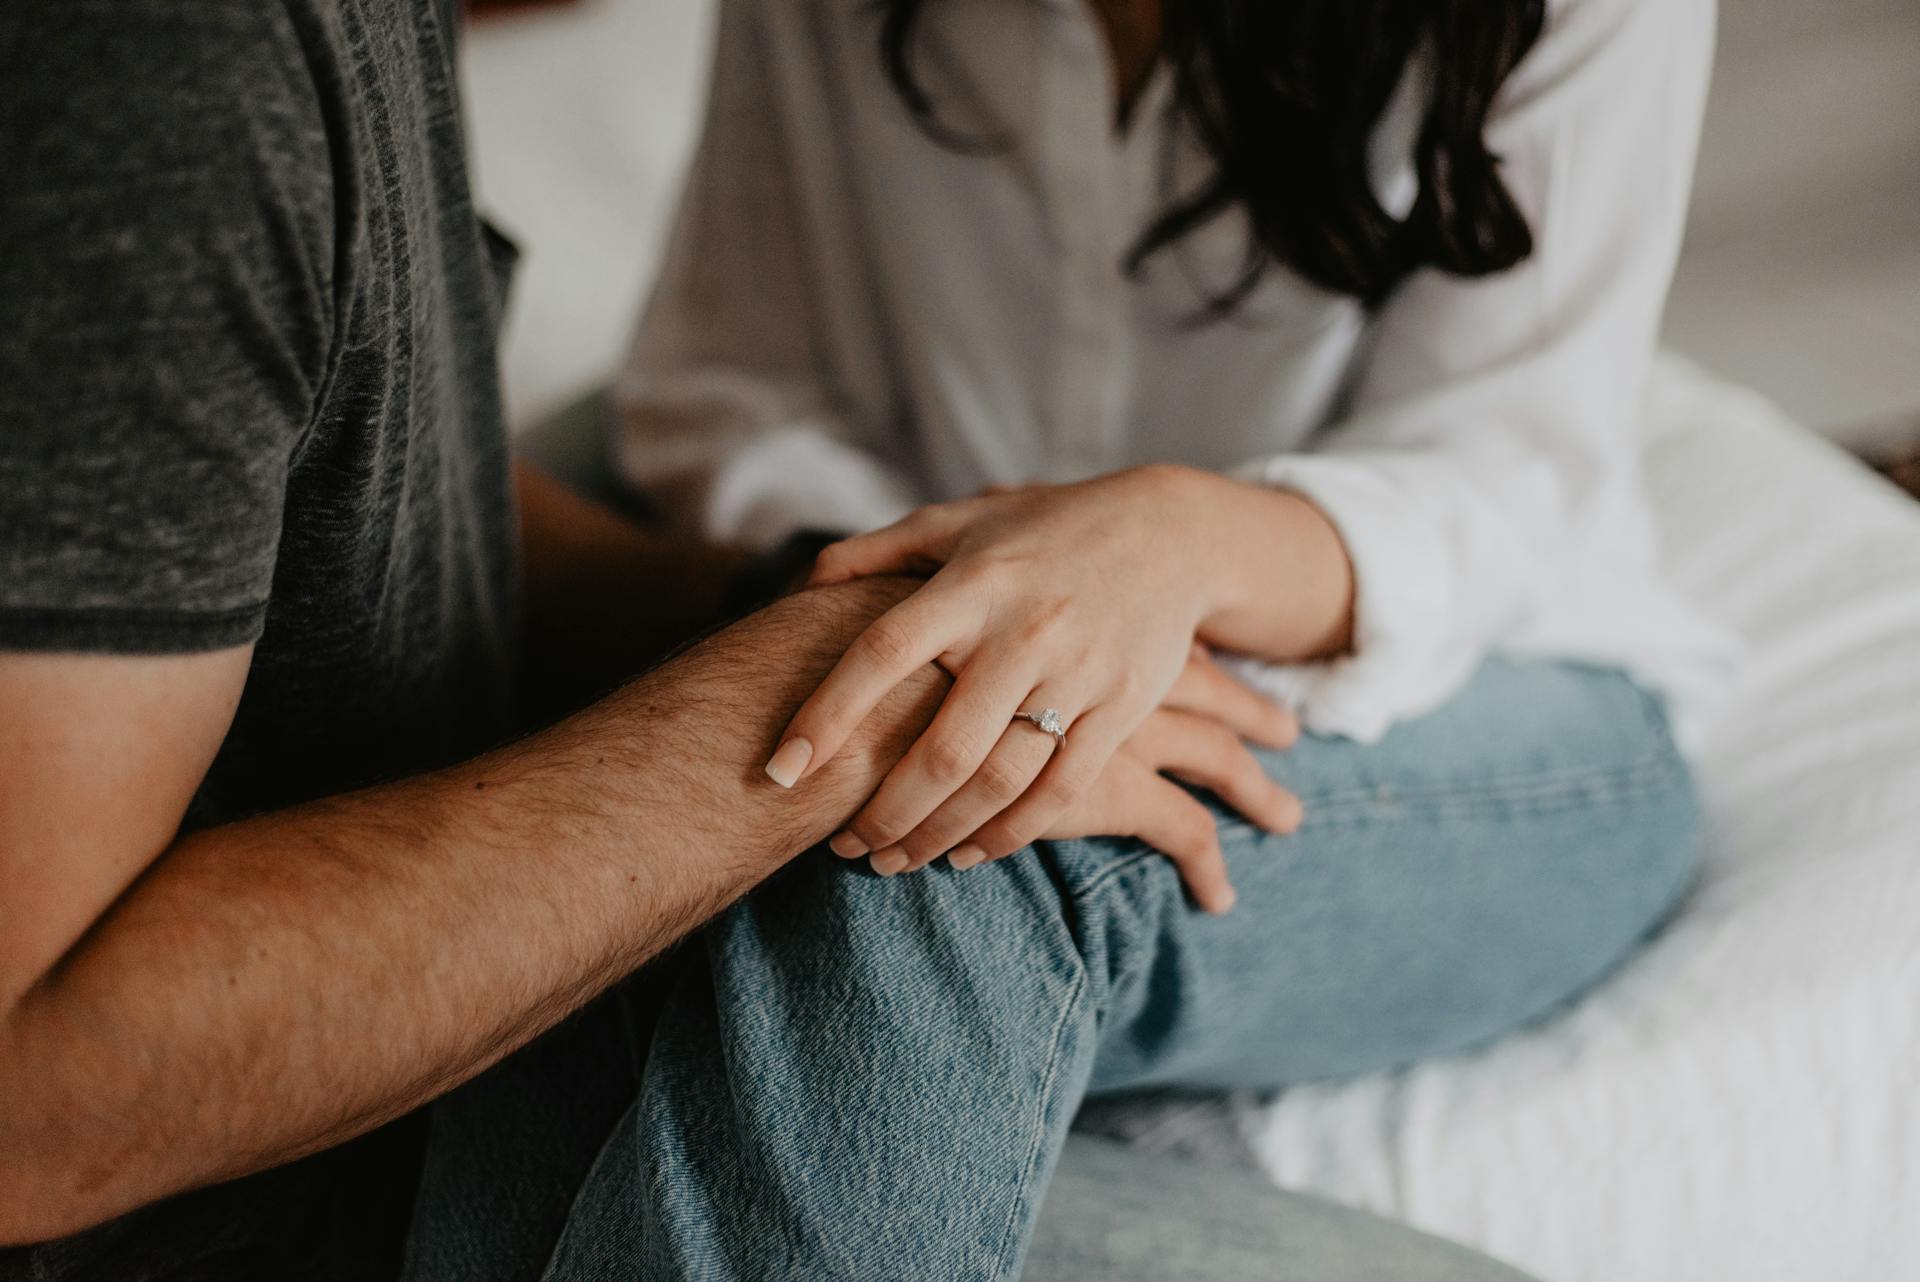 A couple sitting together | Source: Pexels